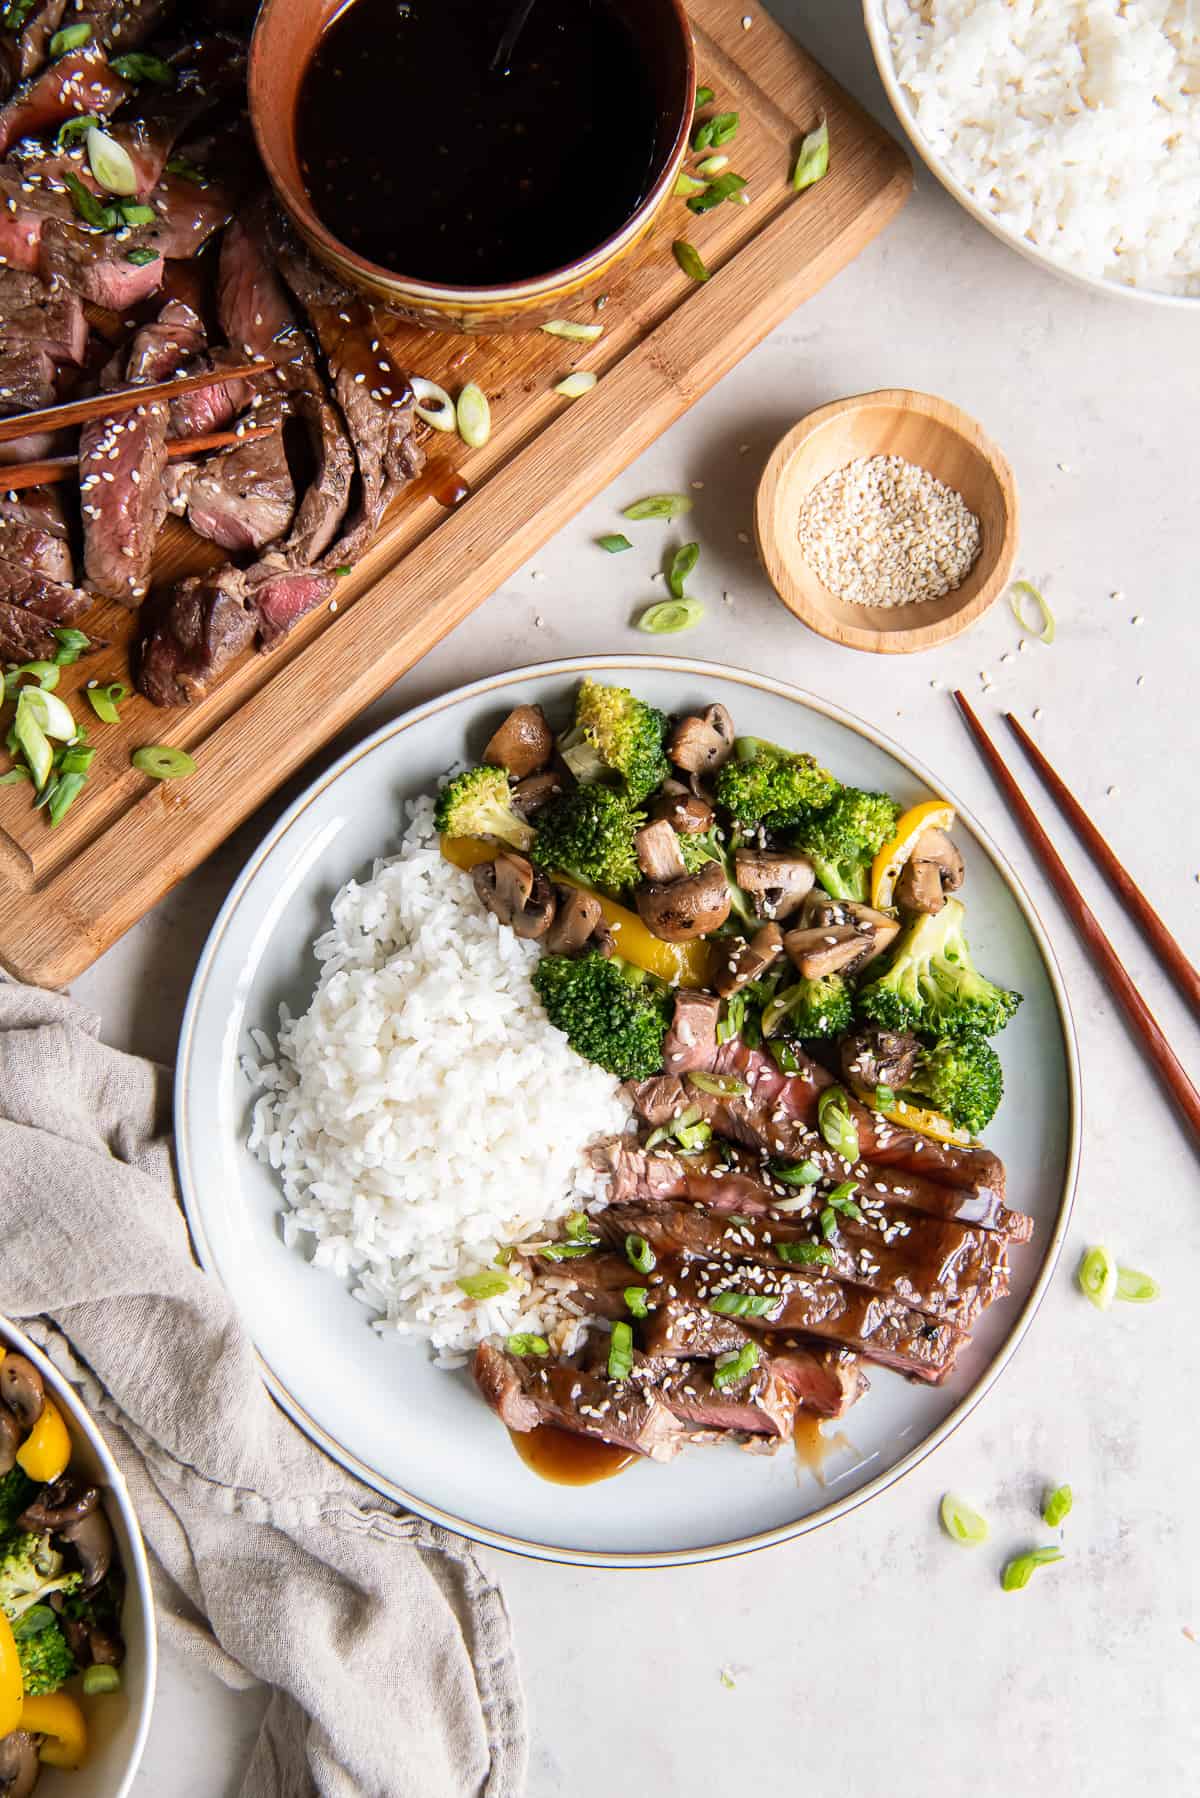 Slices of grilled teriyaki steak on a white plate with rice and stir fried vegetables next to a cutting board filled with sliced steak.